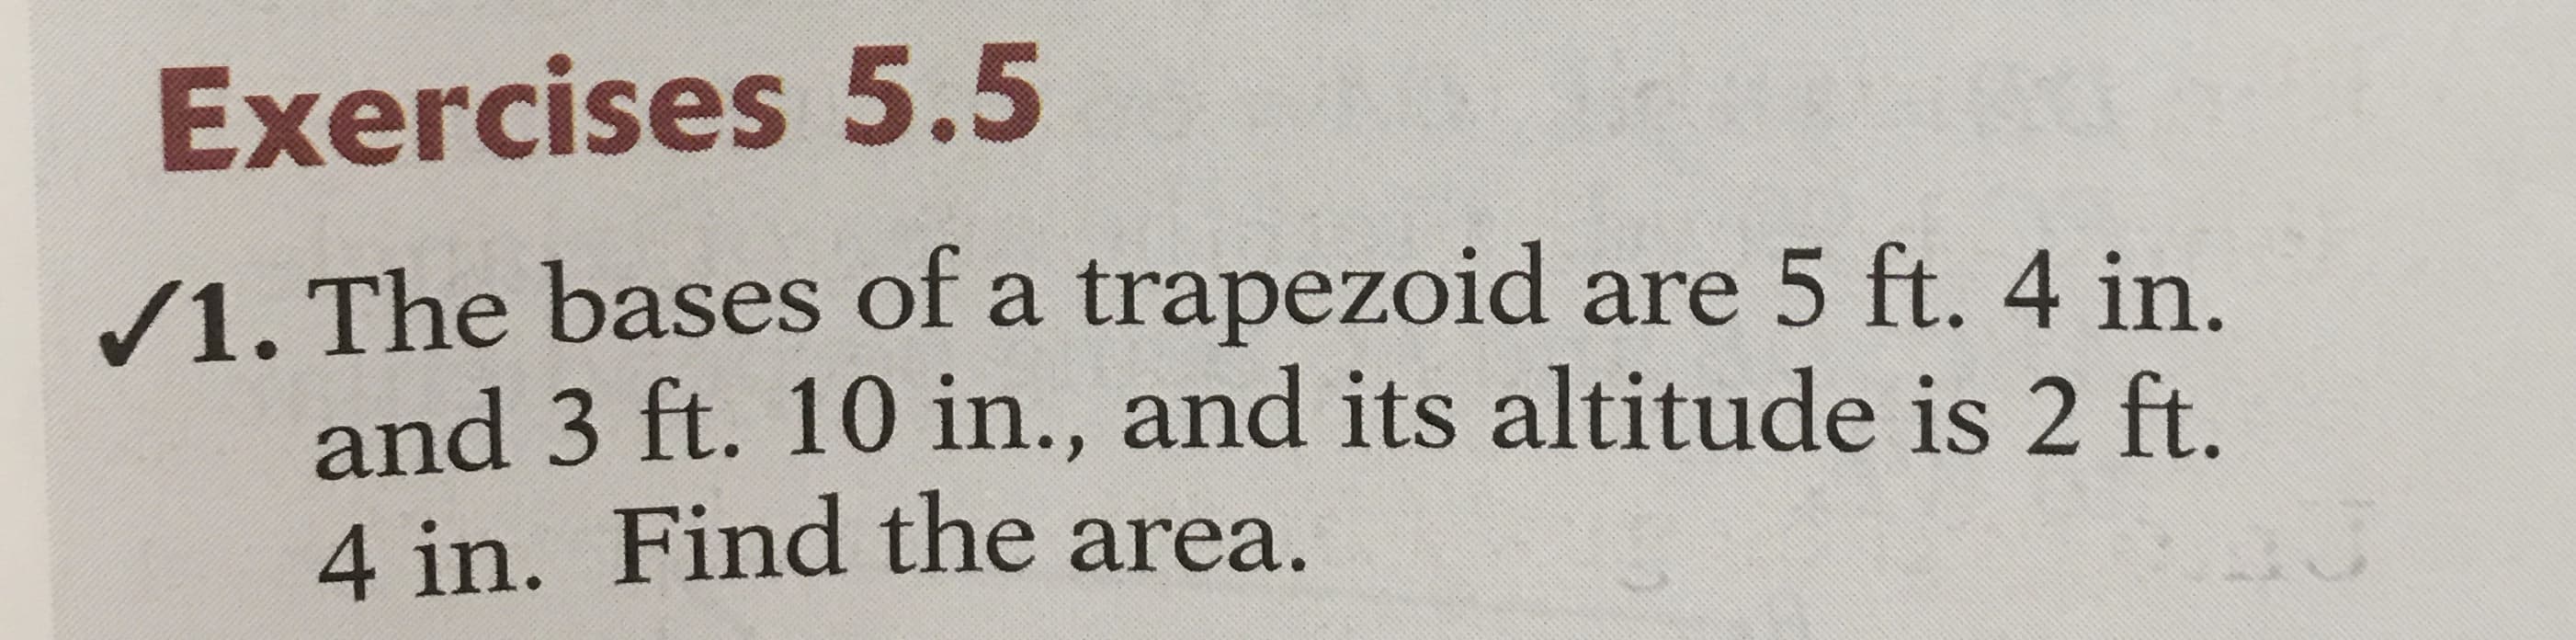 Exercises 5.5
/1. The bases of a trapezoid are 5 ft. 4 in.
and 3 ft. 10 in., and its altitude is 2 ft.
4 in. Find the area.
